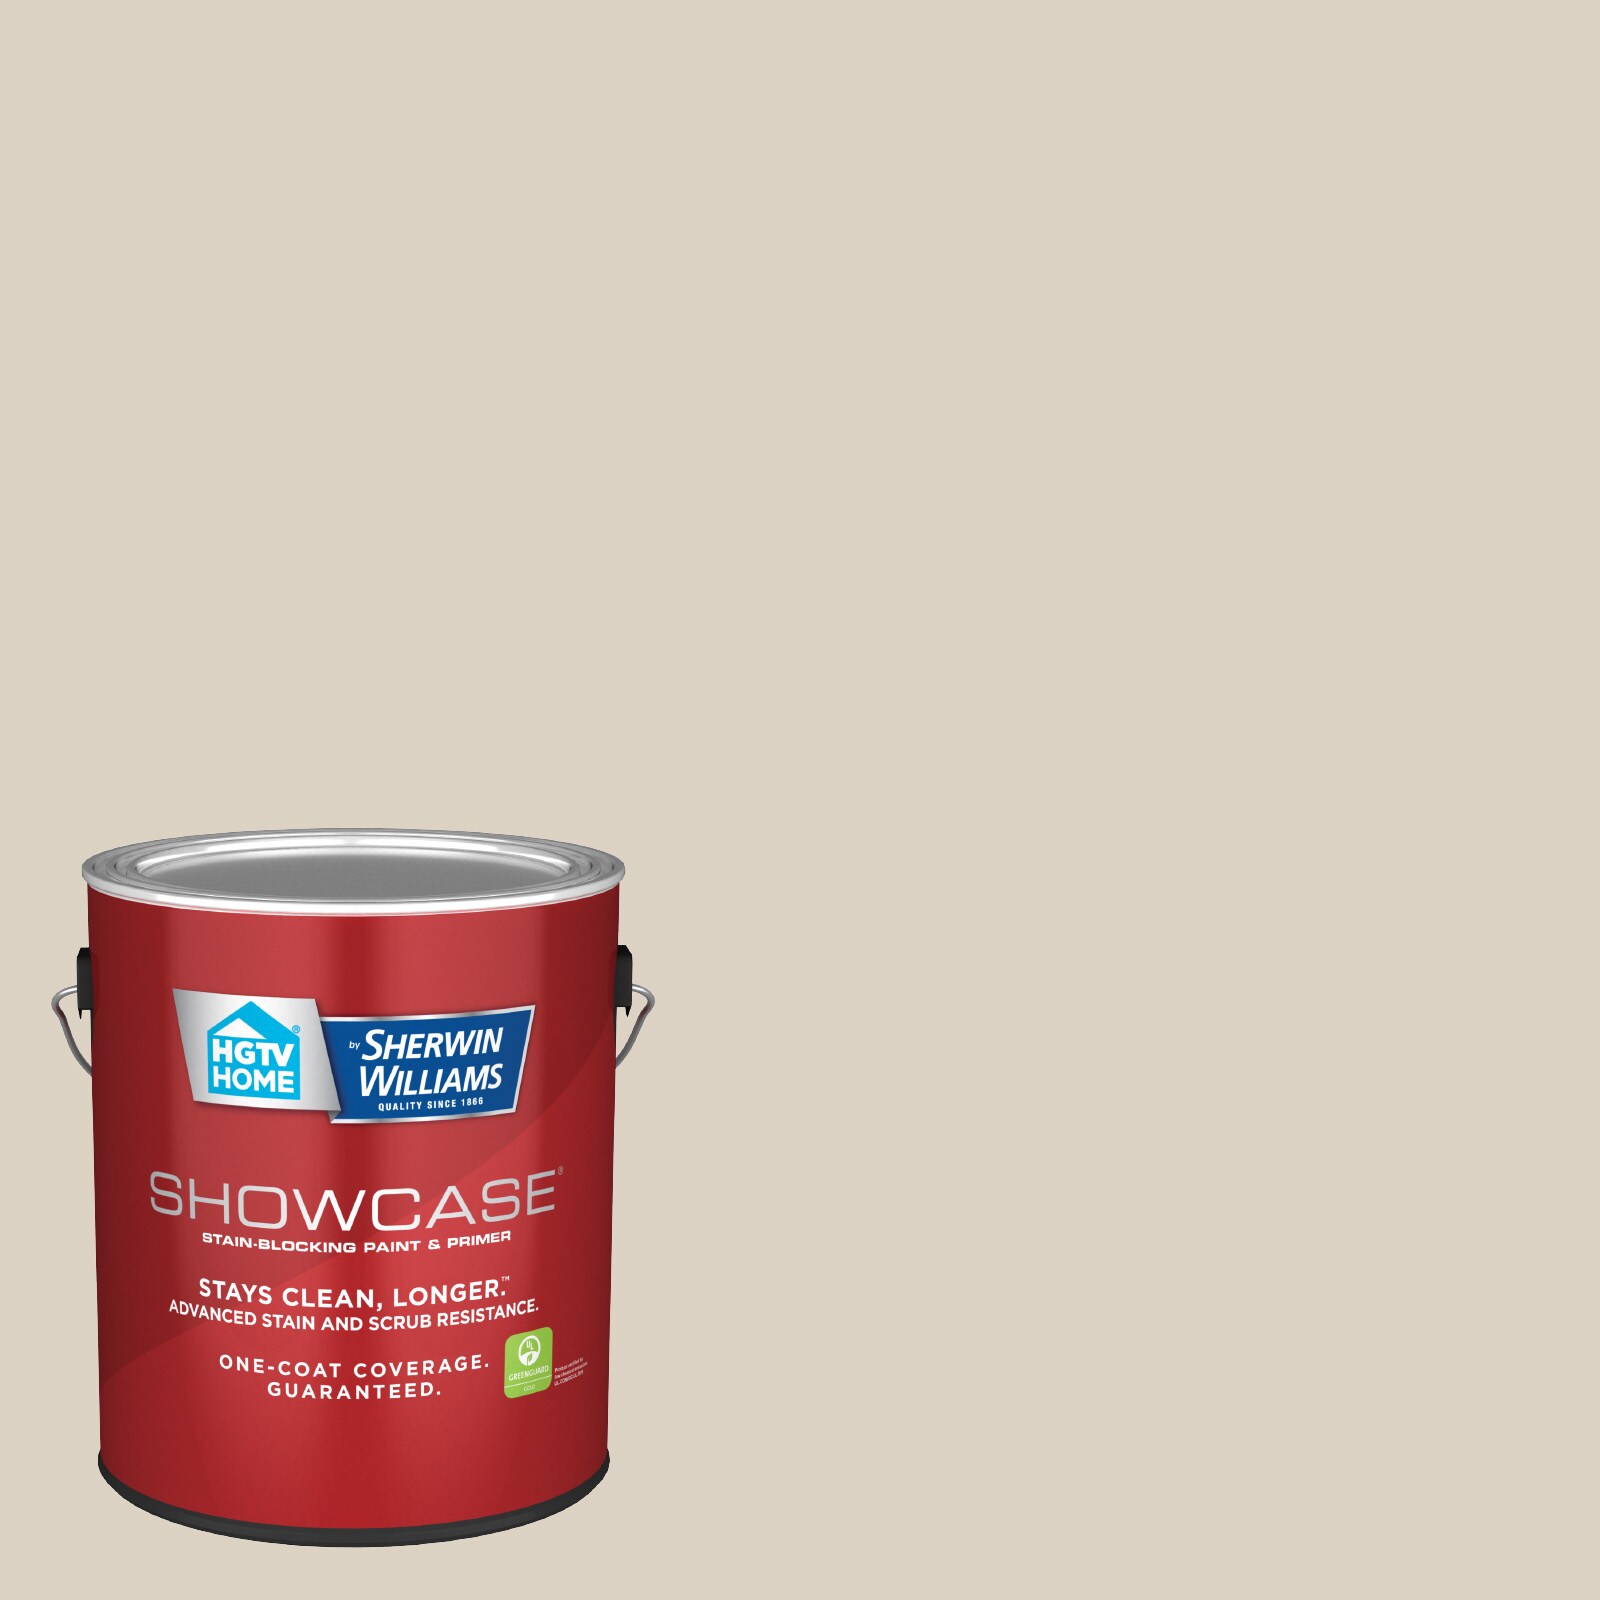 Natural Paint Colors  HGTV Home by Sherwin-Williams